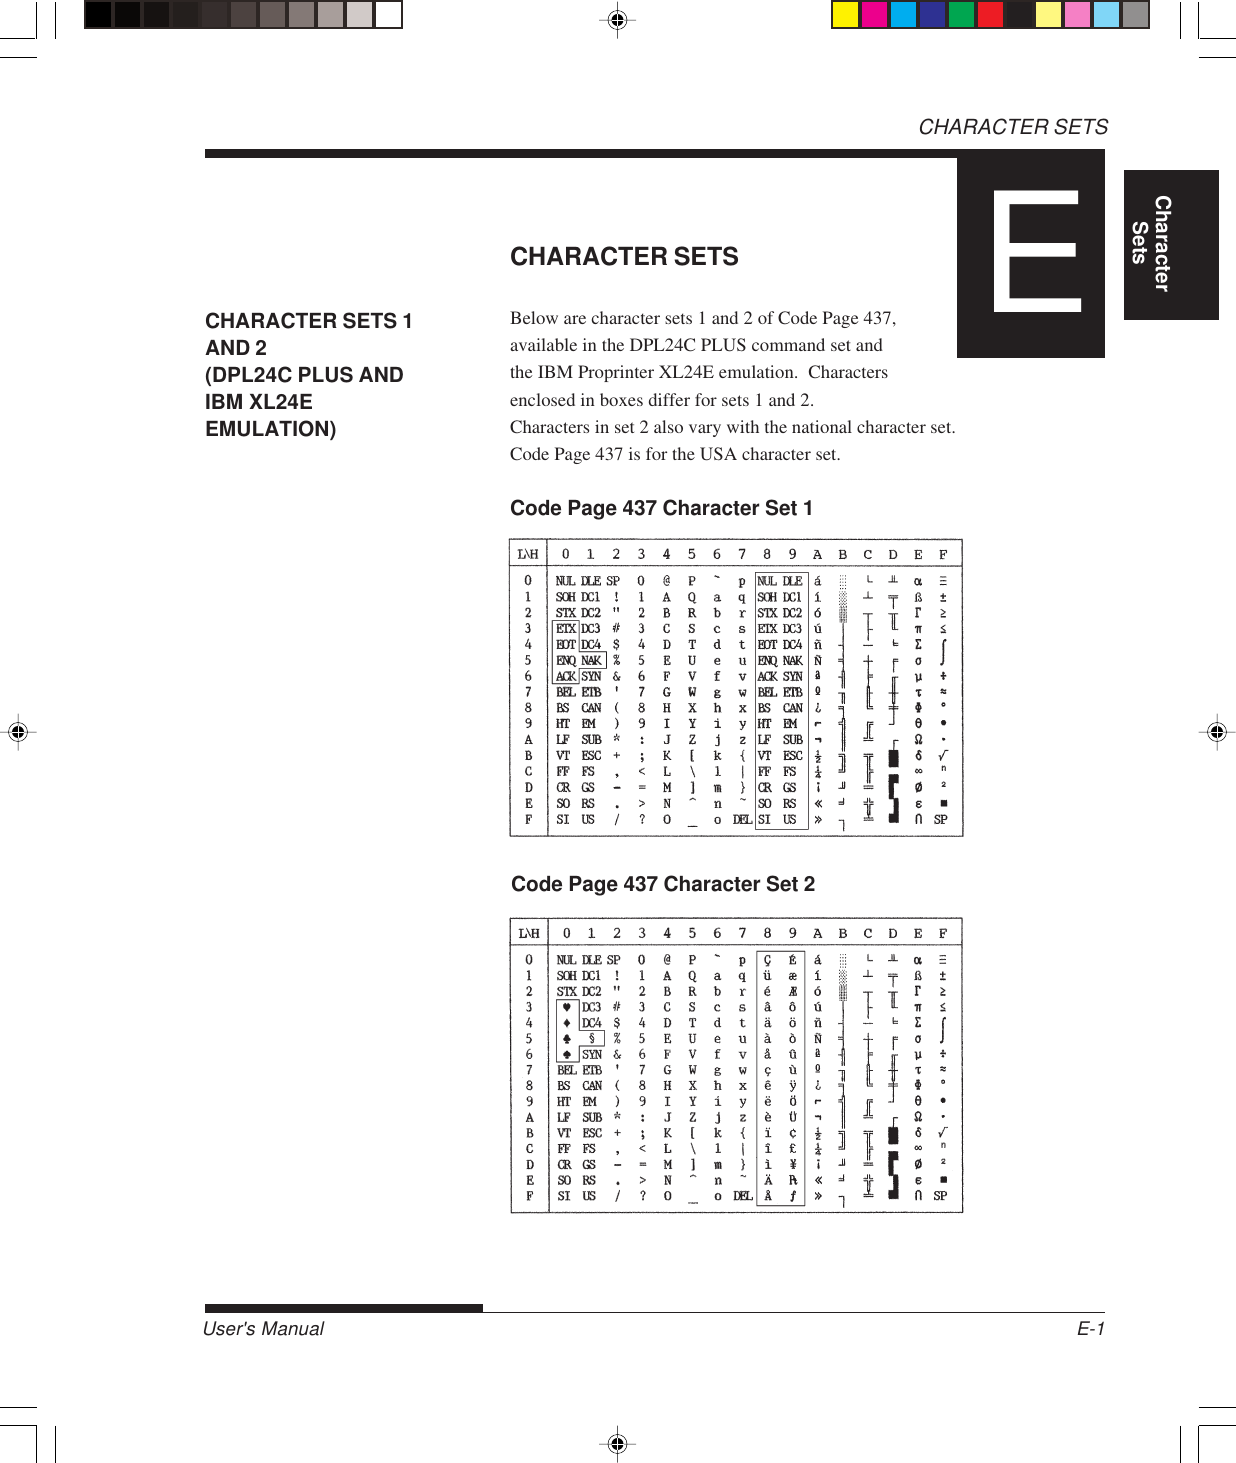 User&apos;s Manual E-1CharacterSetsCHARACTER SETSCHARACTER SETSBelow are character sets 1 and 2 of Code Page 437,available in the DPL24C PLUS command set andthe IBM Proprinter XL24E emulation.  Charactersenclosed in boxes differ for sets 1 and 2.Characters in set 2 also vary with the national character set.Code Page 437 is for the USA character set.Code Page 437 Character Set 1CHARACTER SETS 1AND 2(DPL24C PLUS ANDIBM XL24EEMULATION)ECode Page 437 Character Set 2